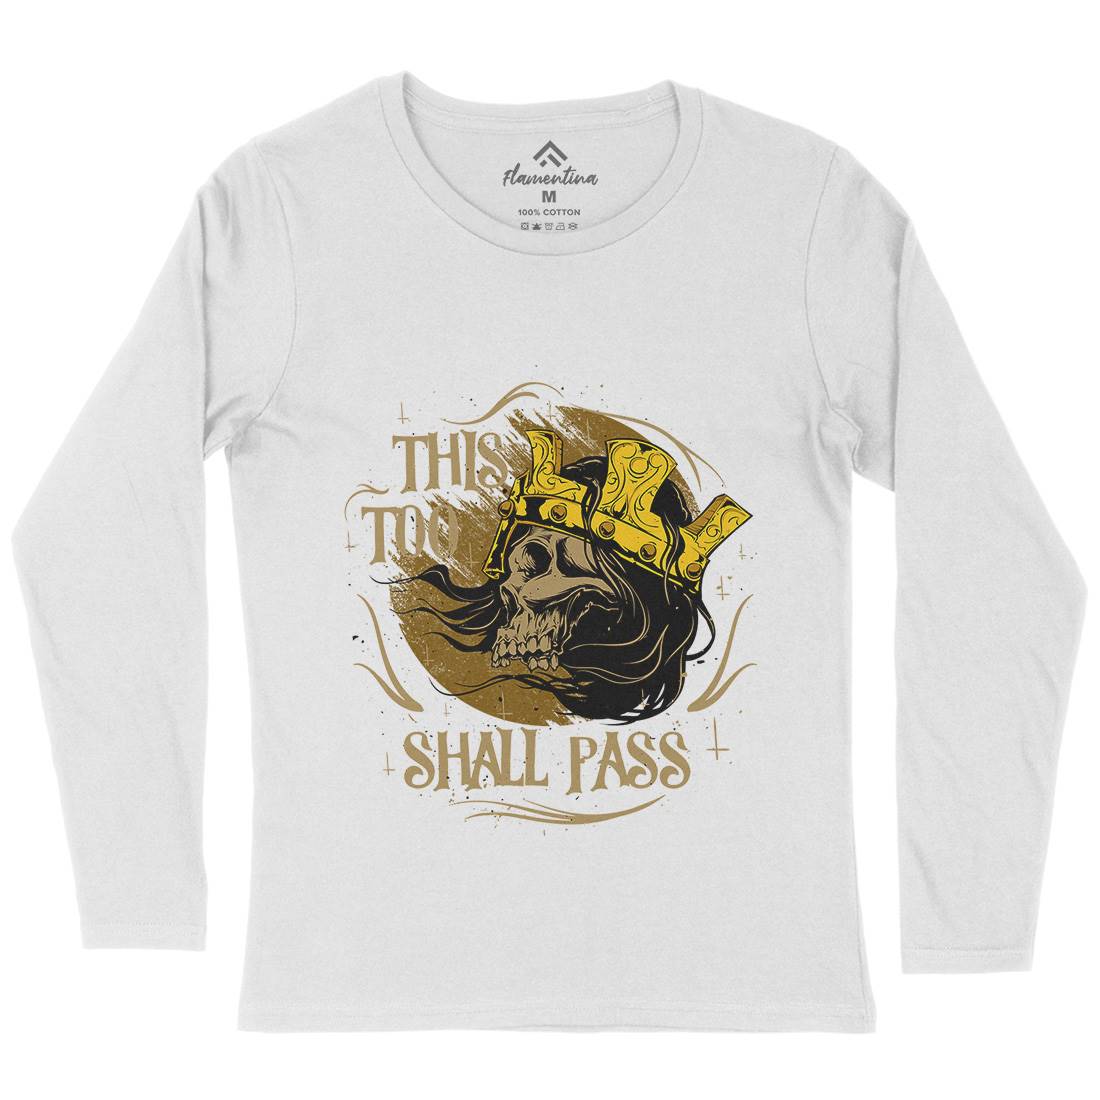 This Too Shall Pass Womens Long Sleeve T-Shirt Horror D492